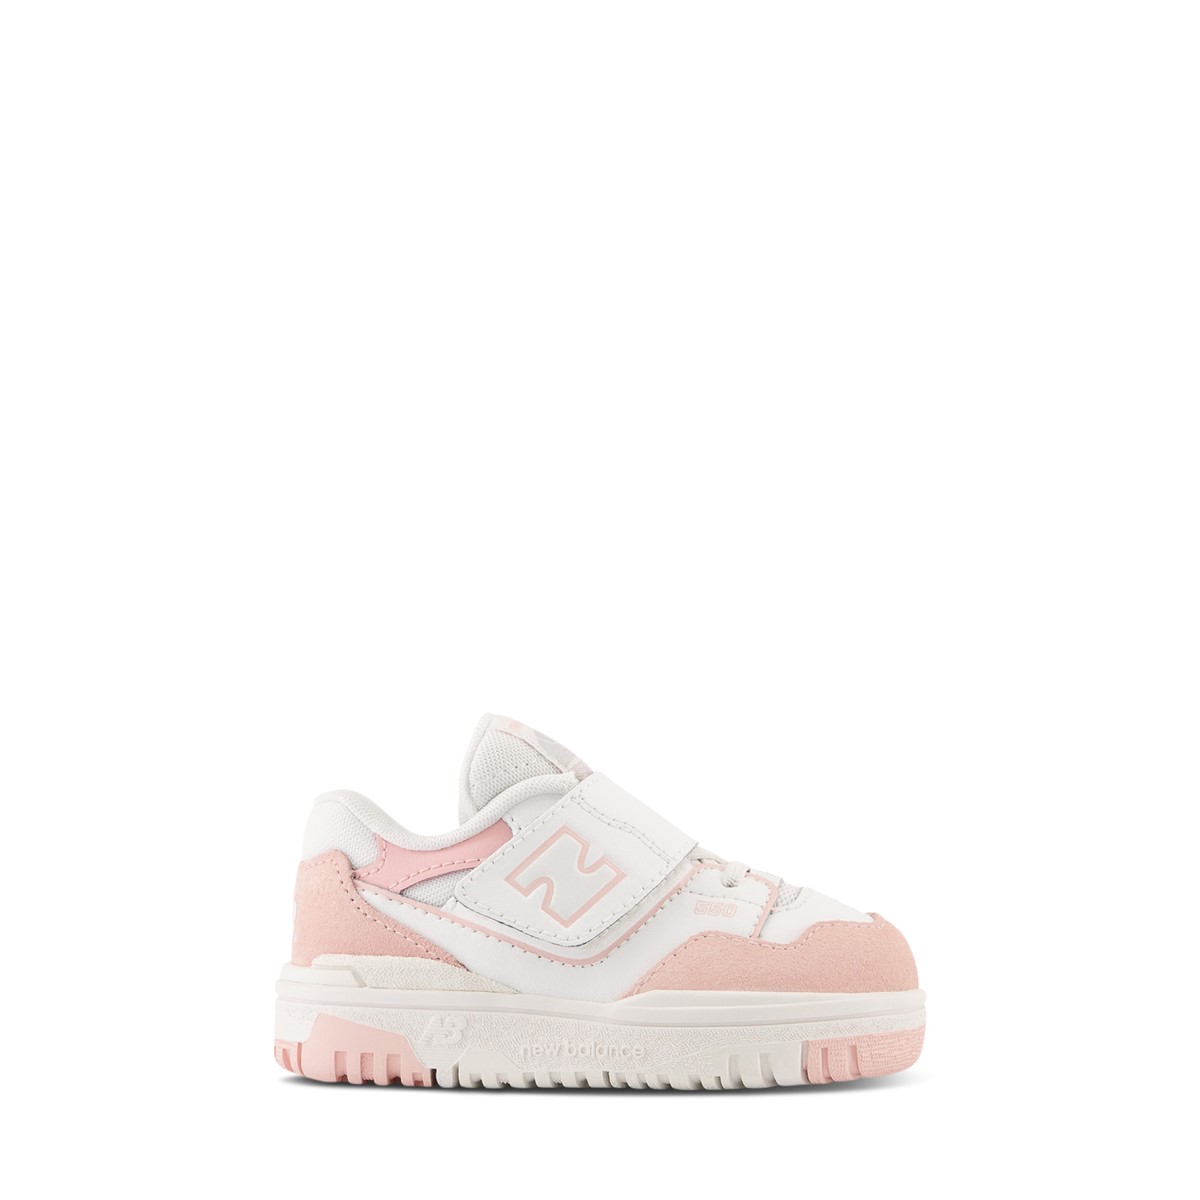 Toddler's' BB550 Sneakers in White/Pink